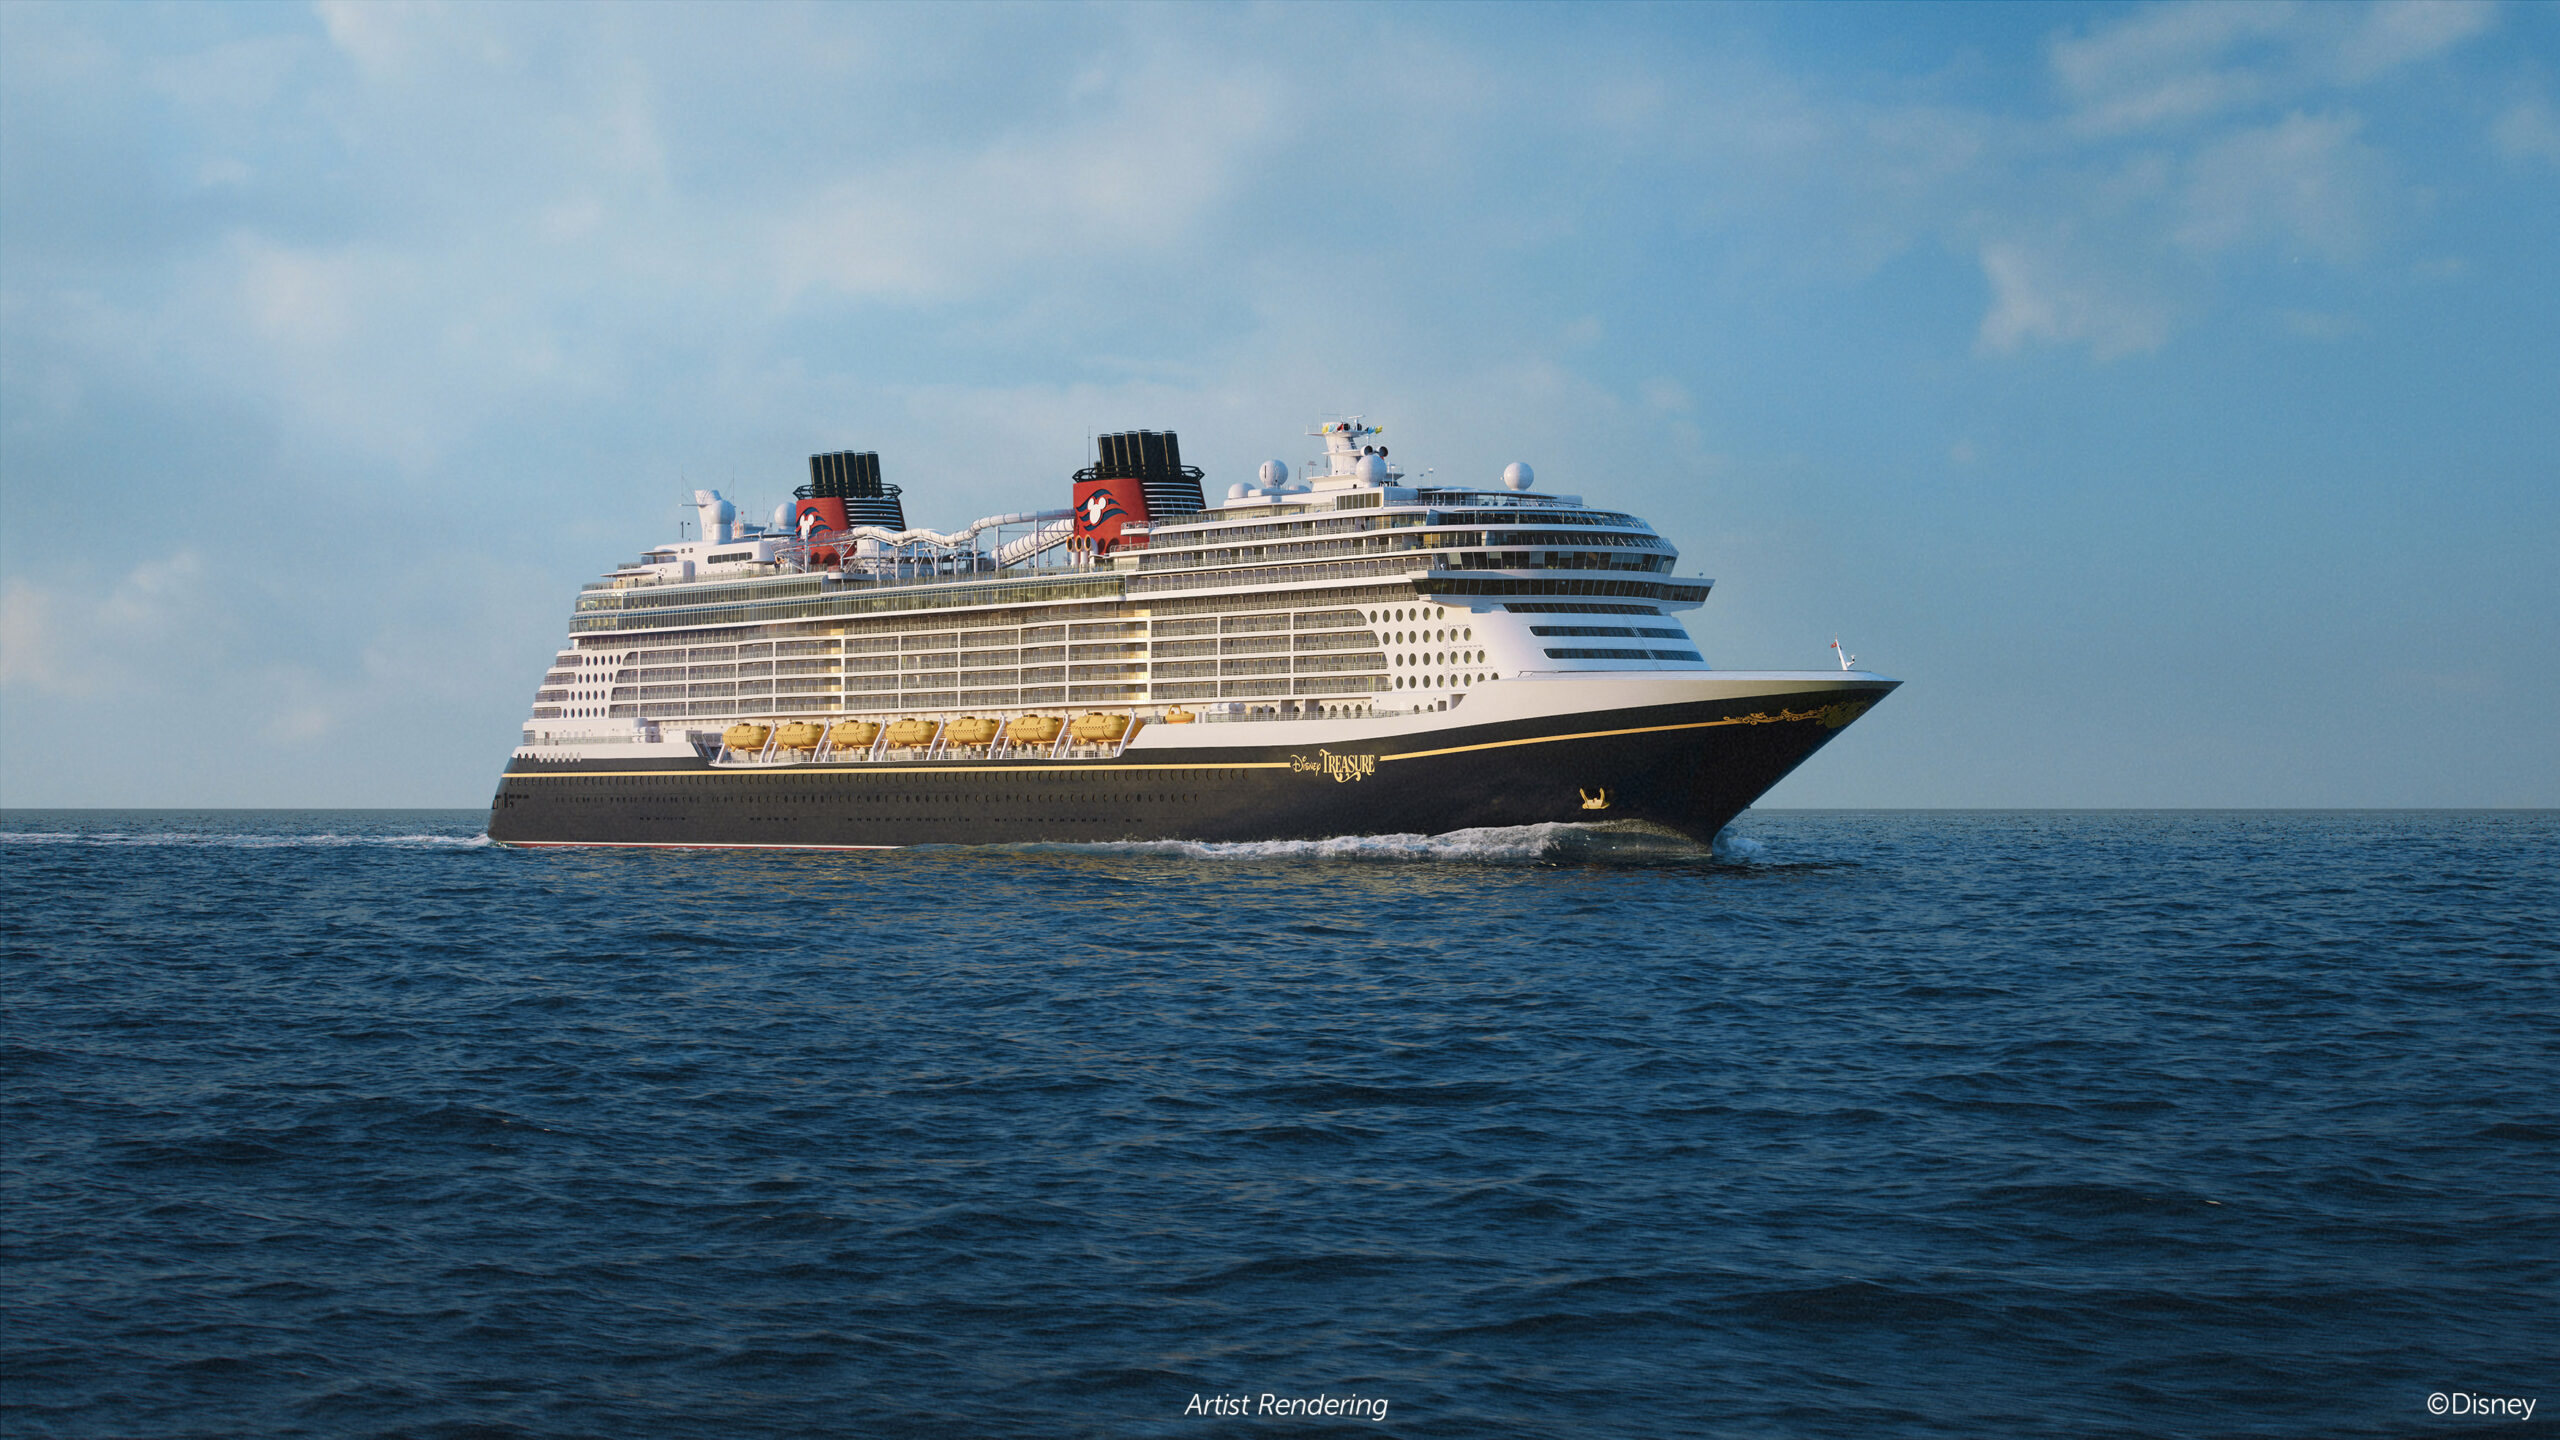 The Disney Treasure, the newest ship in the Disney Cruise Line fleet expansion, will set sail in December 2024, embarking on its inaugural season of seven-night itineraries to the Eastern and Western Caribbean from Port Canaveral, Florida. Adventure will serve as the architectural and thematic foundation of the ship, in honor of Walt Disney’s legendary passion for travel and exploration. (Disney)